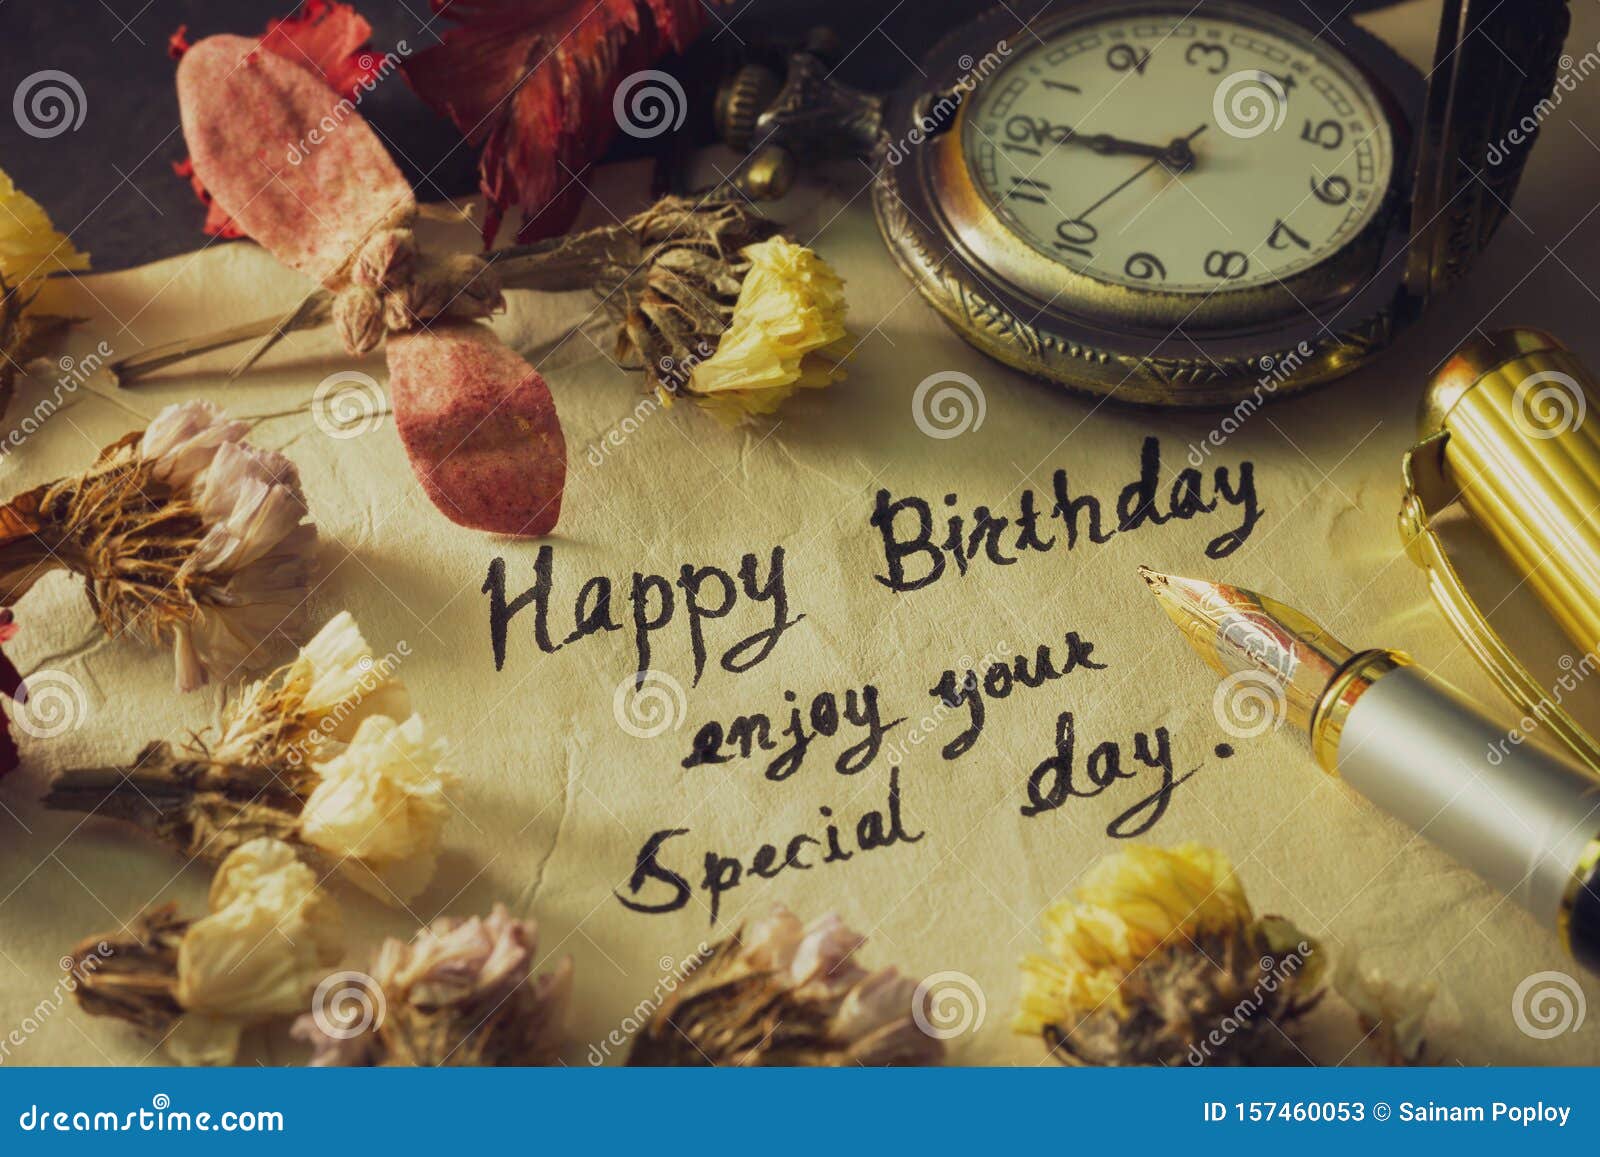 Happy Birthday Enjoy Your Special Day. Stock Image - Image of ...